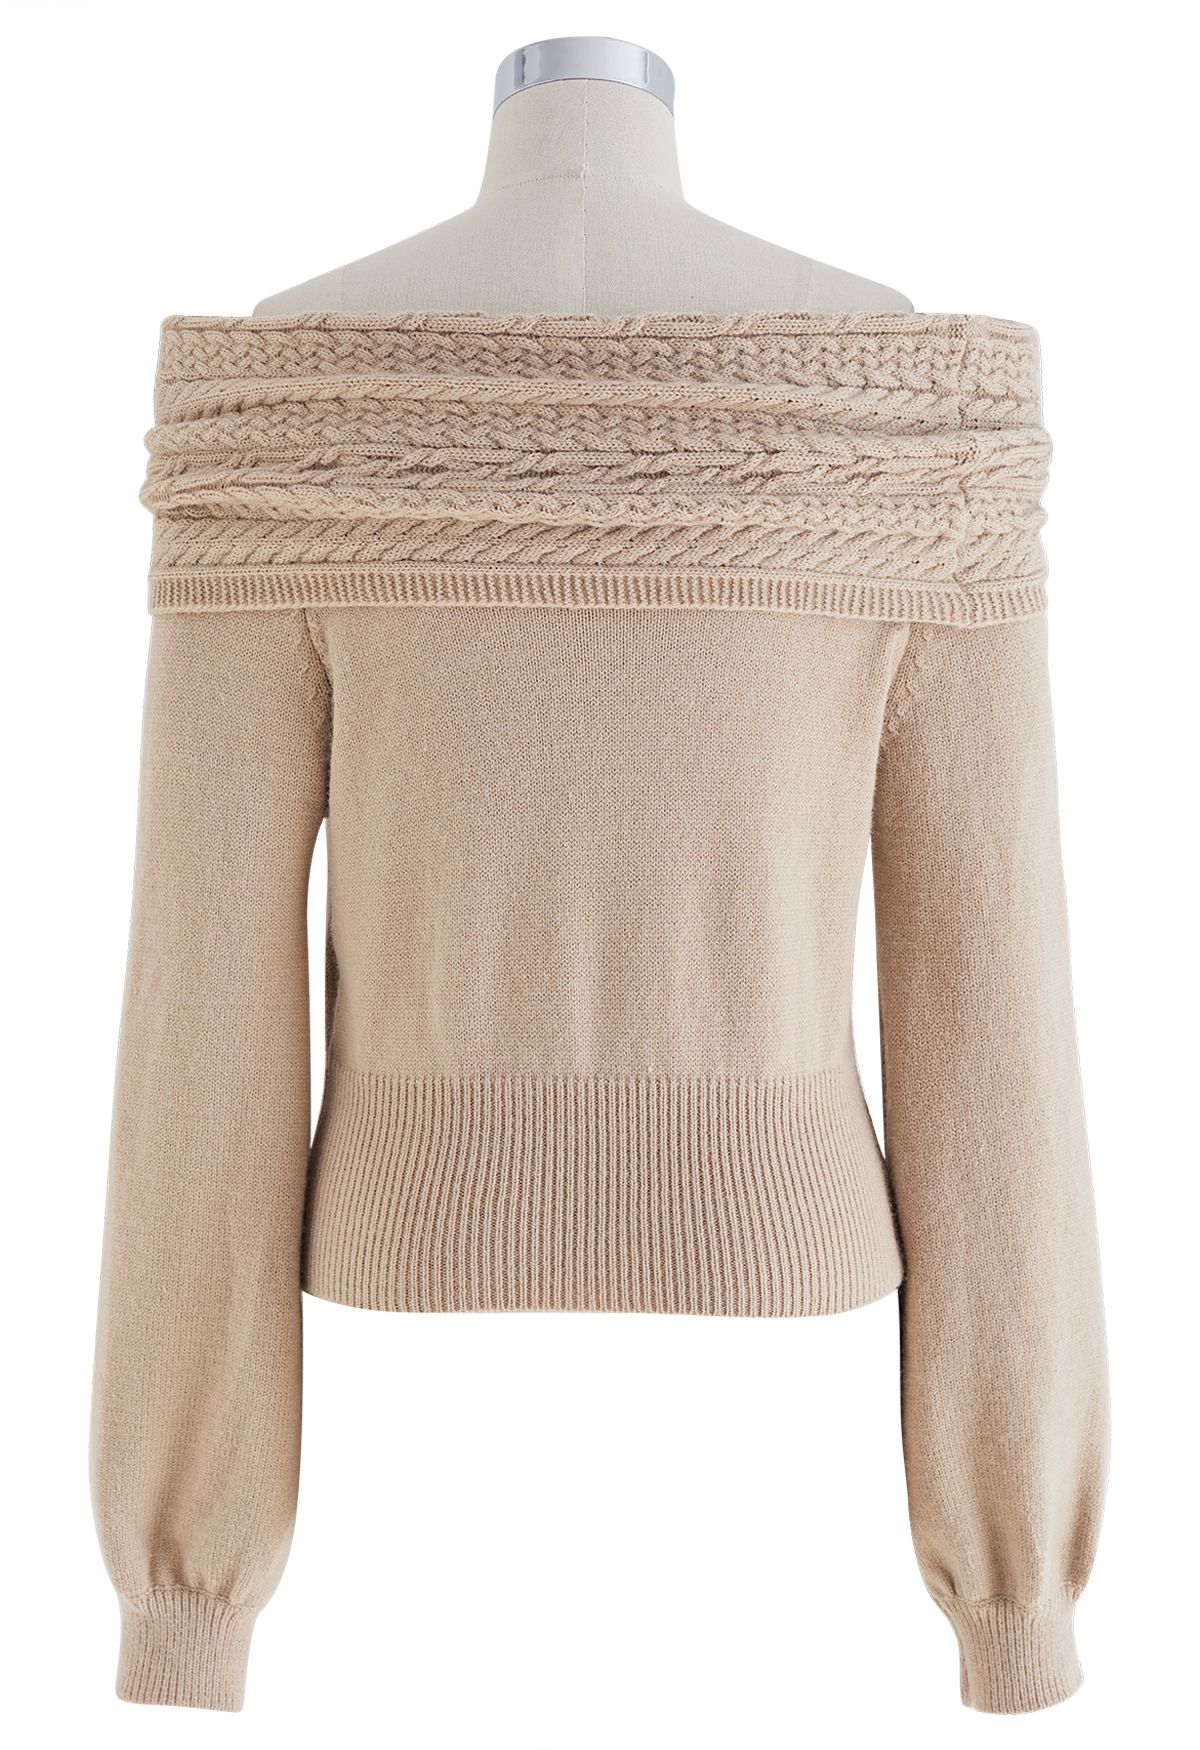 Braided Flap Off-Shoulder Knit Top in Linen